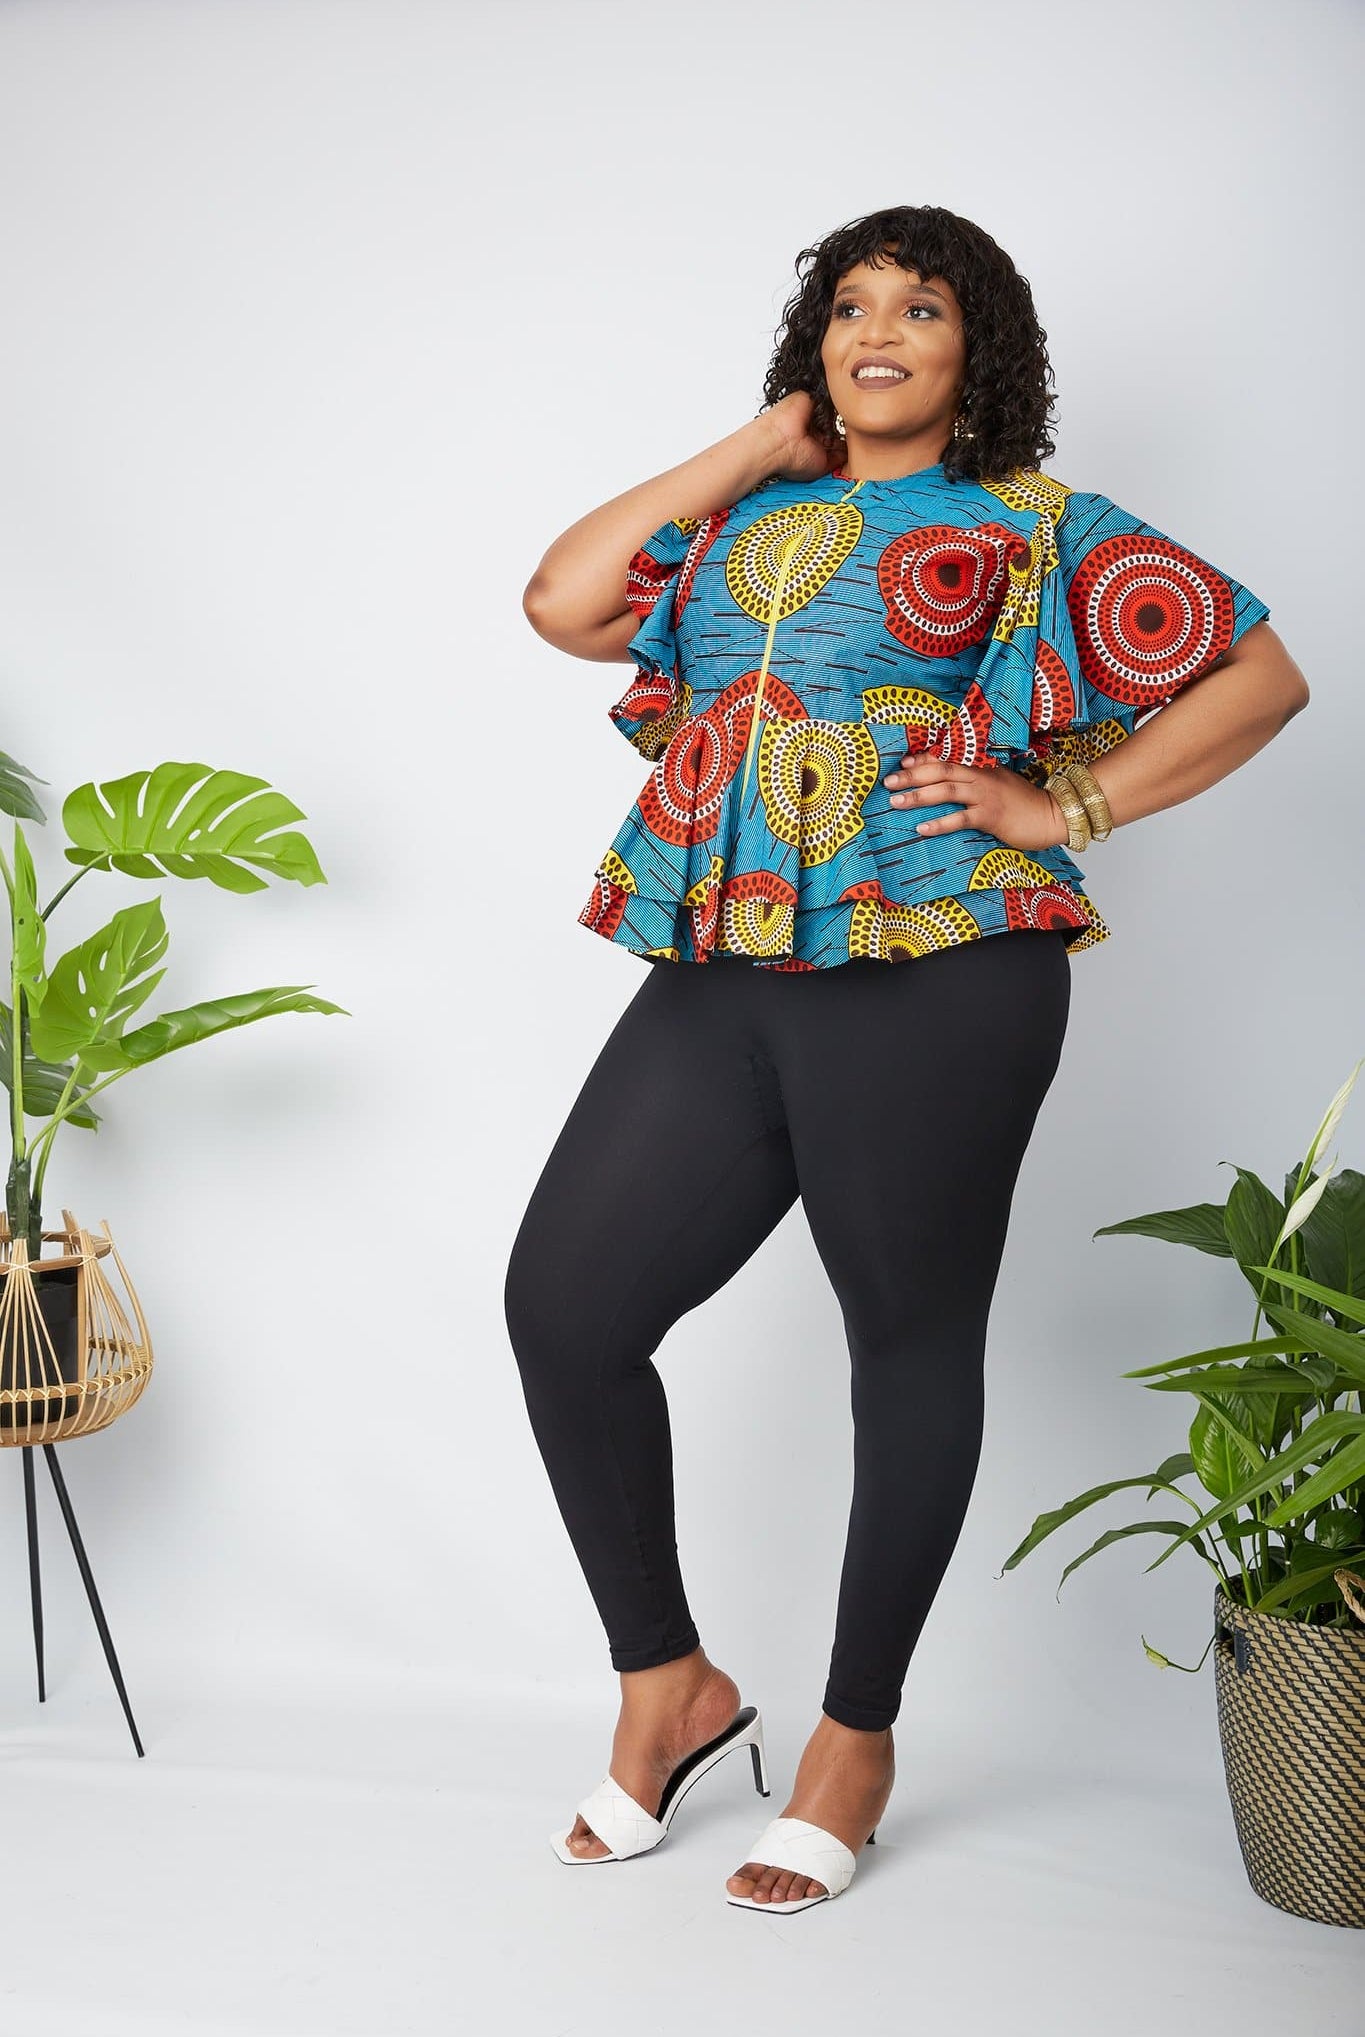 Black owned African Clothing Brand in the UK. Discover Sustainable and ethical African Print apparel handmade by local artisans in Africa. Traditional African Print Wrap Top, African Print Crop Top, modern African Print Off Shoulder top, Danshiki Shirt, Plus Size African print blouse, matching African couples outfits